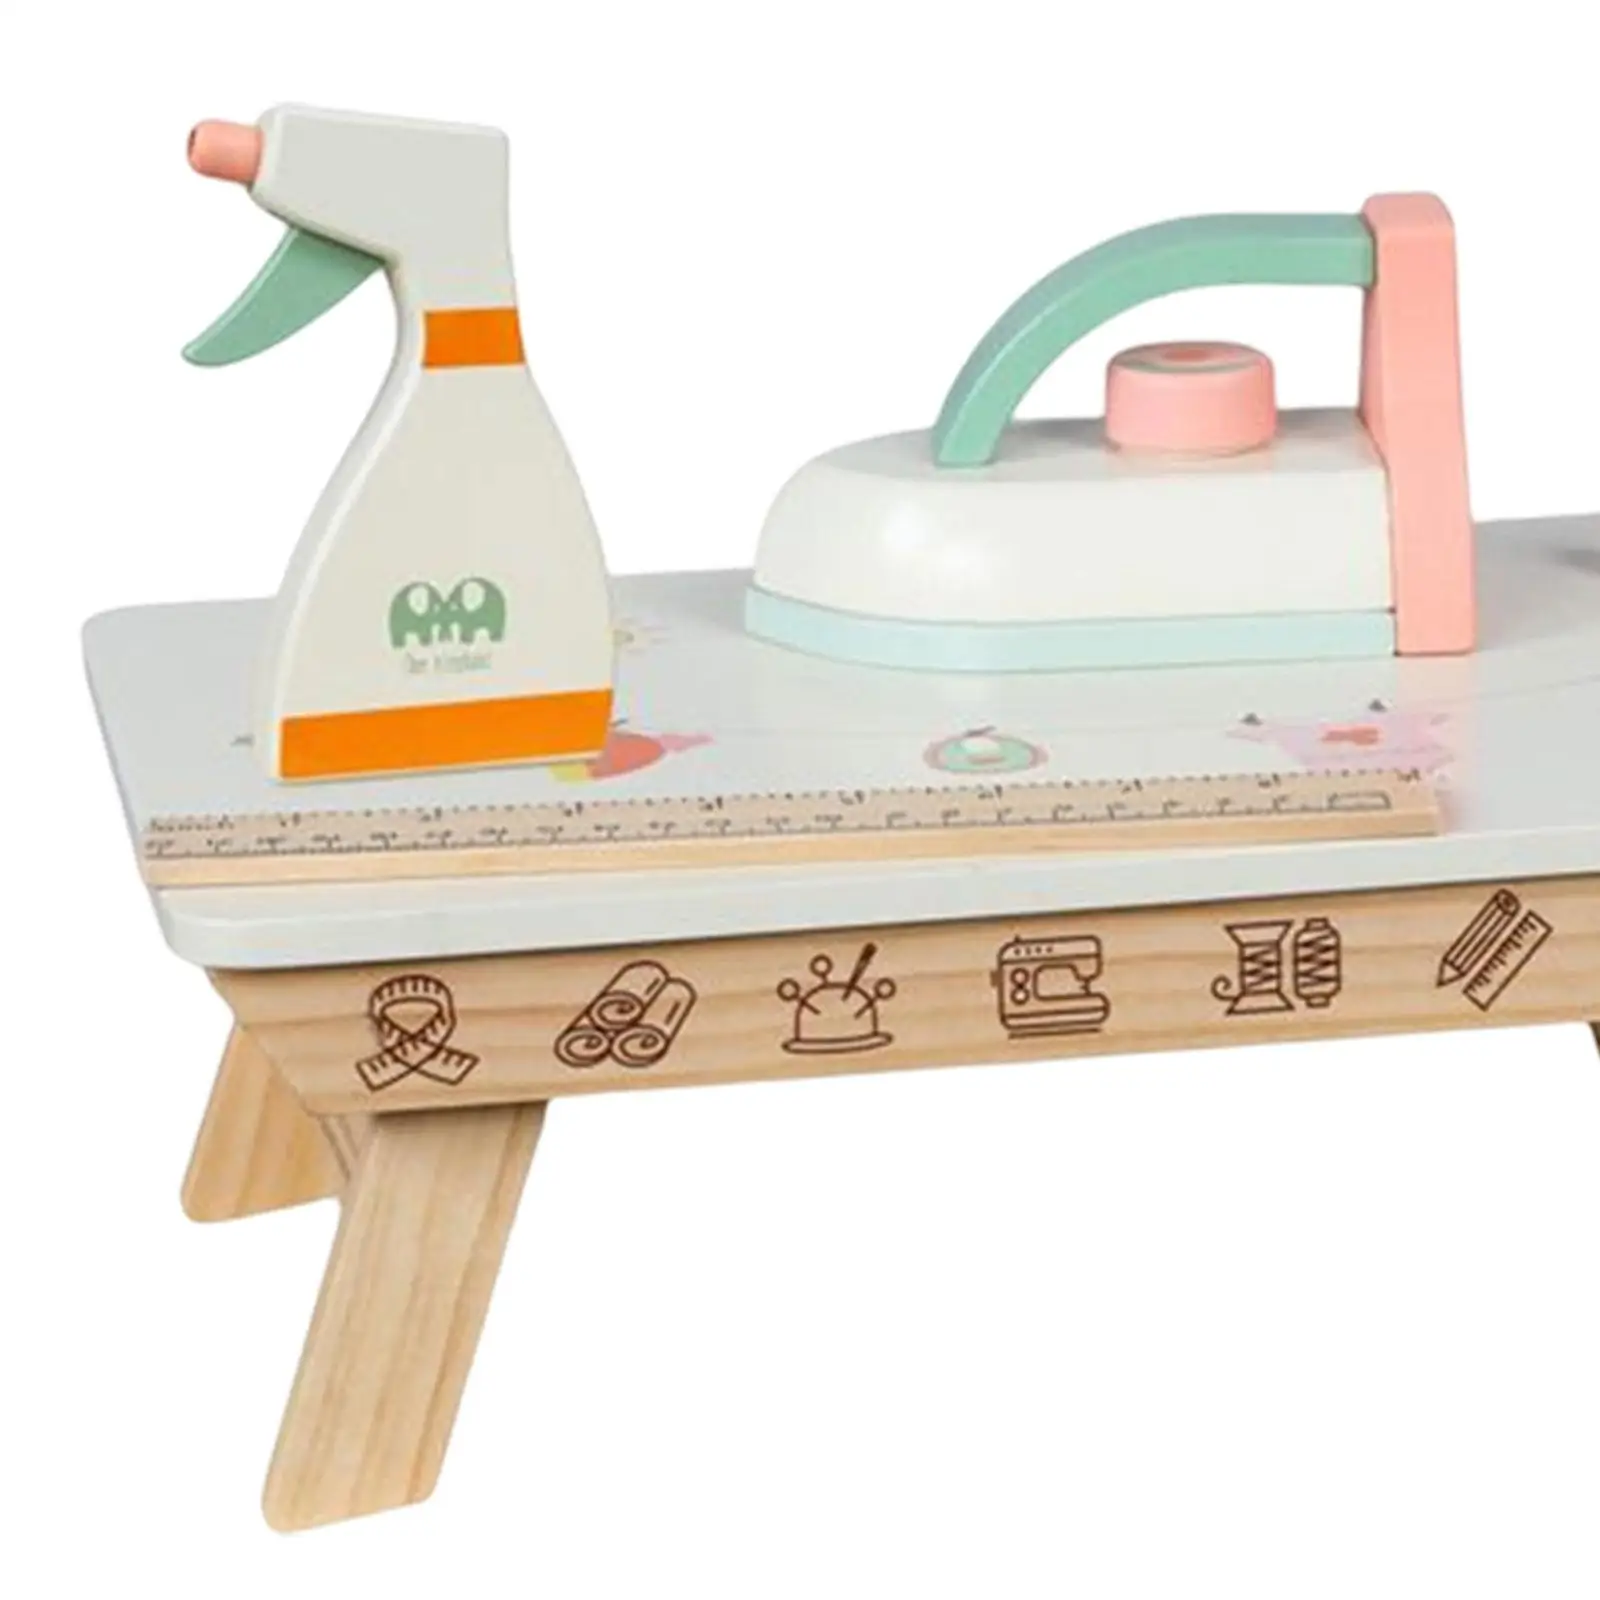 Pretend Ironing Board and Ironing Housework Toy Development Sensory Toy Early Educational Toy Laundry Toys for Ages 3+ Kids